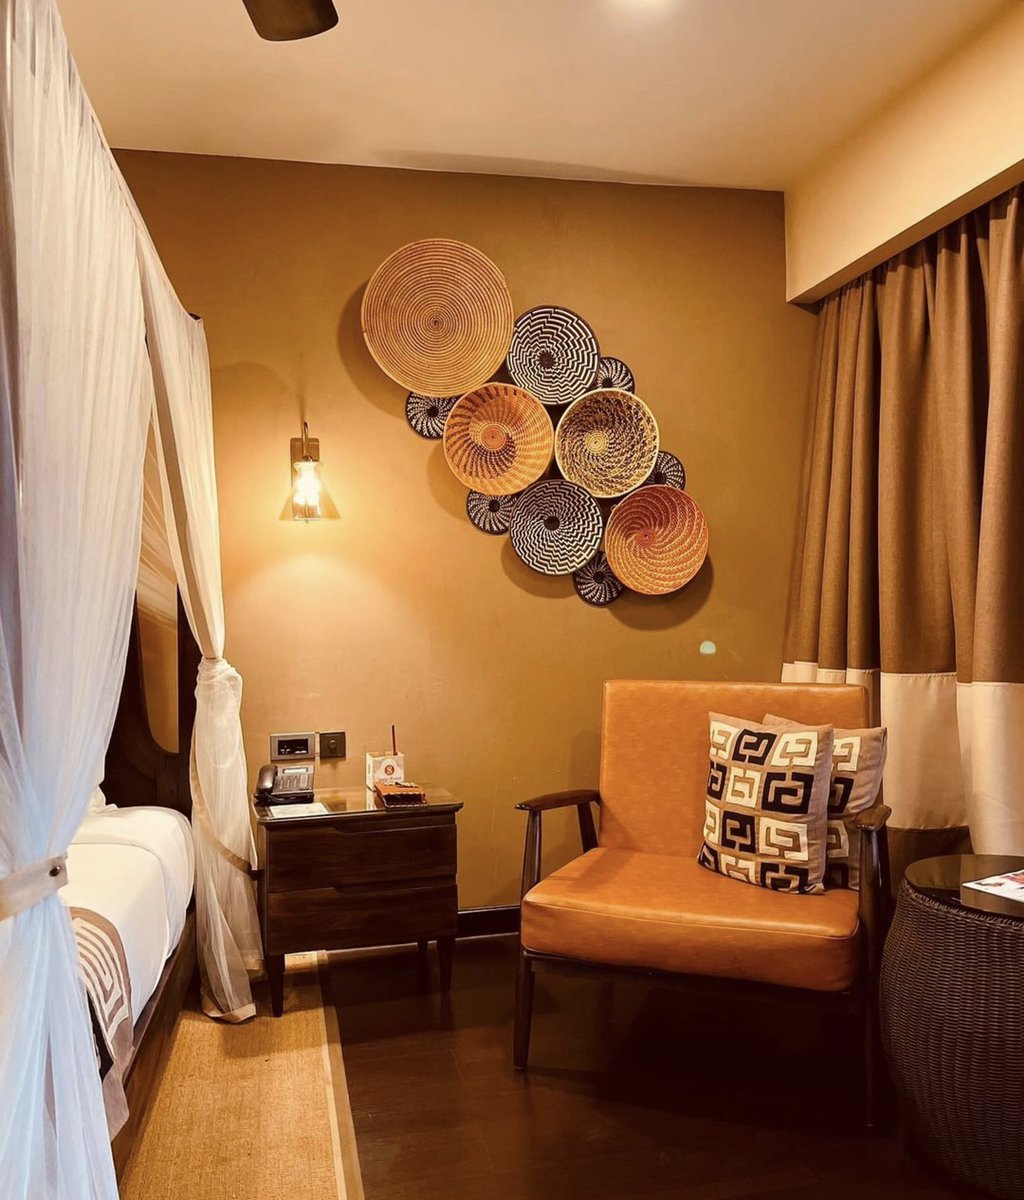 Leave your worries behind and escape to a world of relaxation! Our luxurious rooms, sun-drenched ambiance, and top-notch amenities guarantee the ultimate comfort experience. Book your paradise getaway now... spekeresort.com #visitmunyonyo #spekeresortmunyonyo